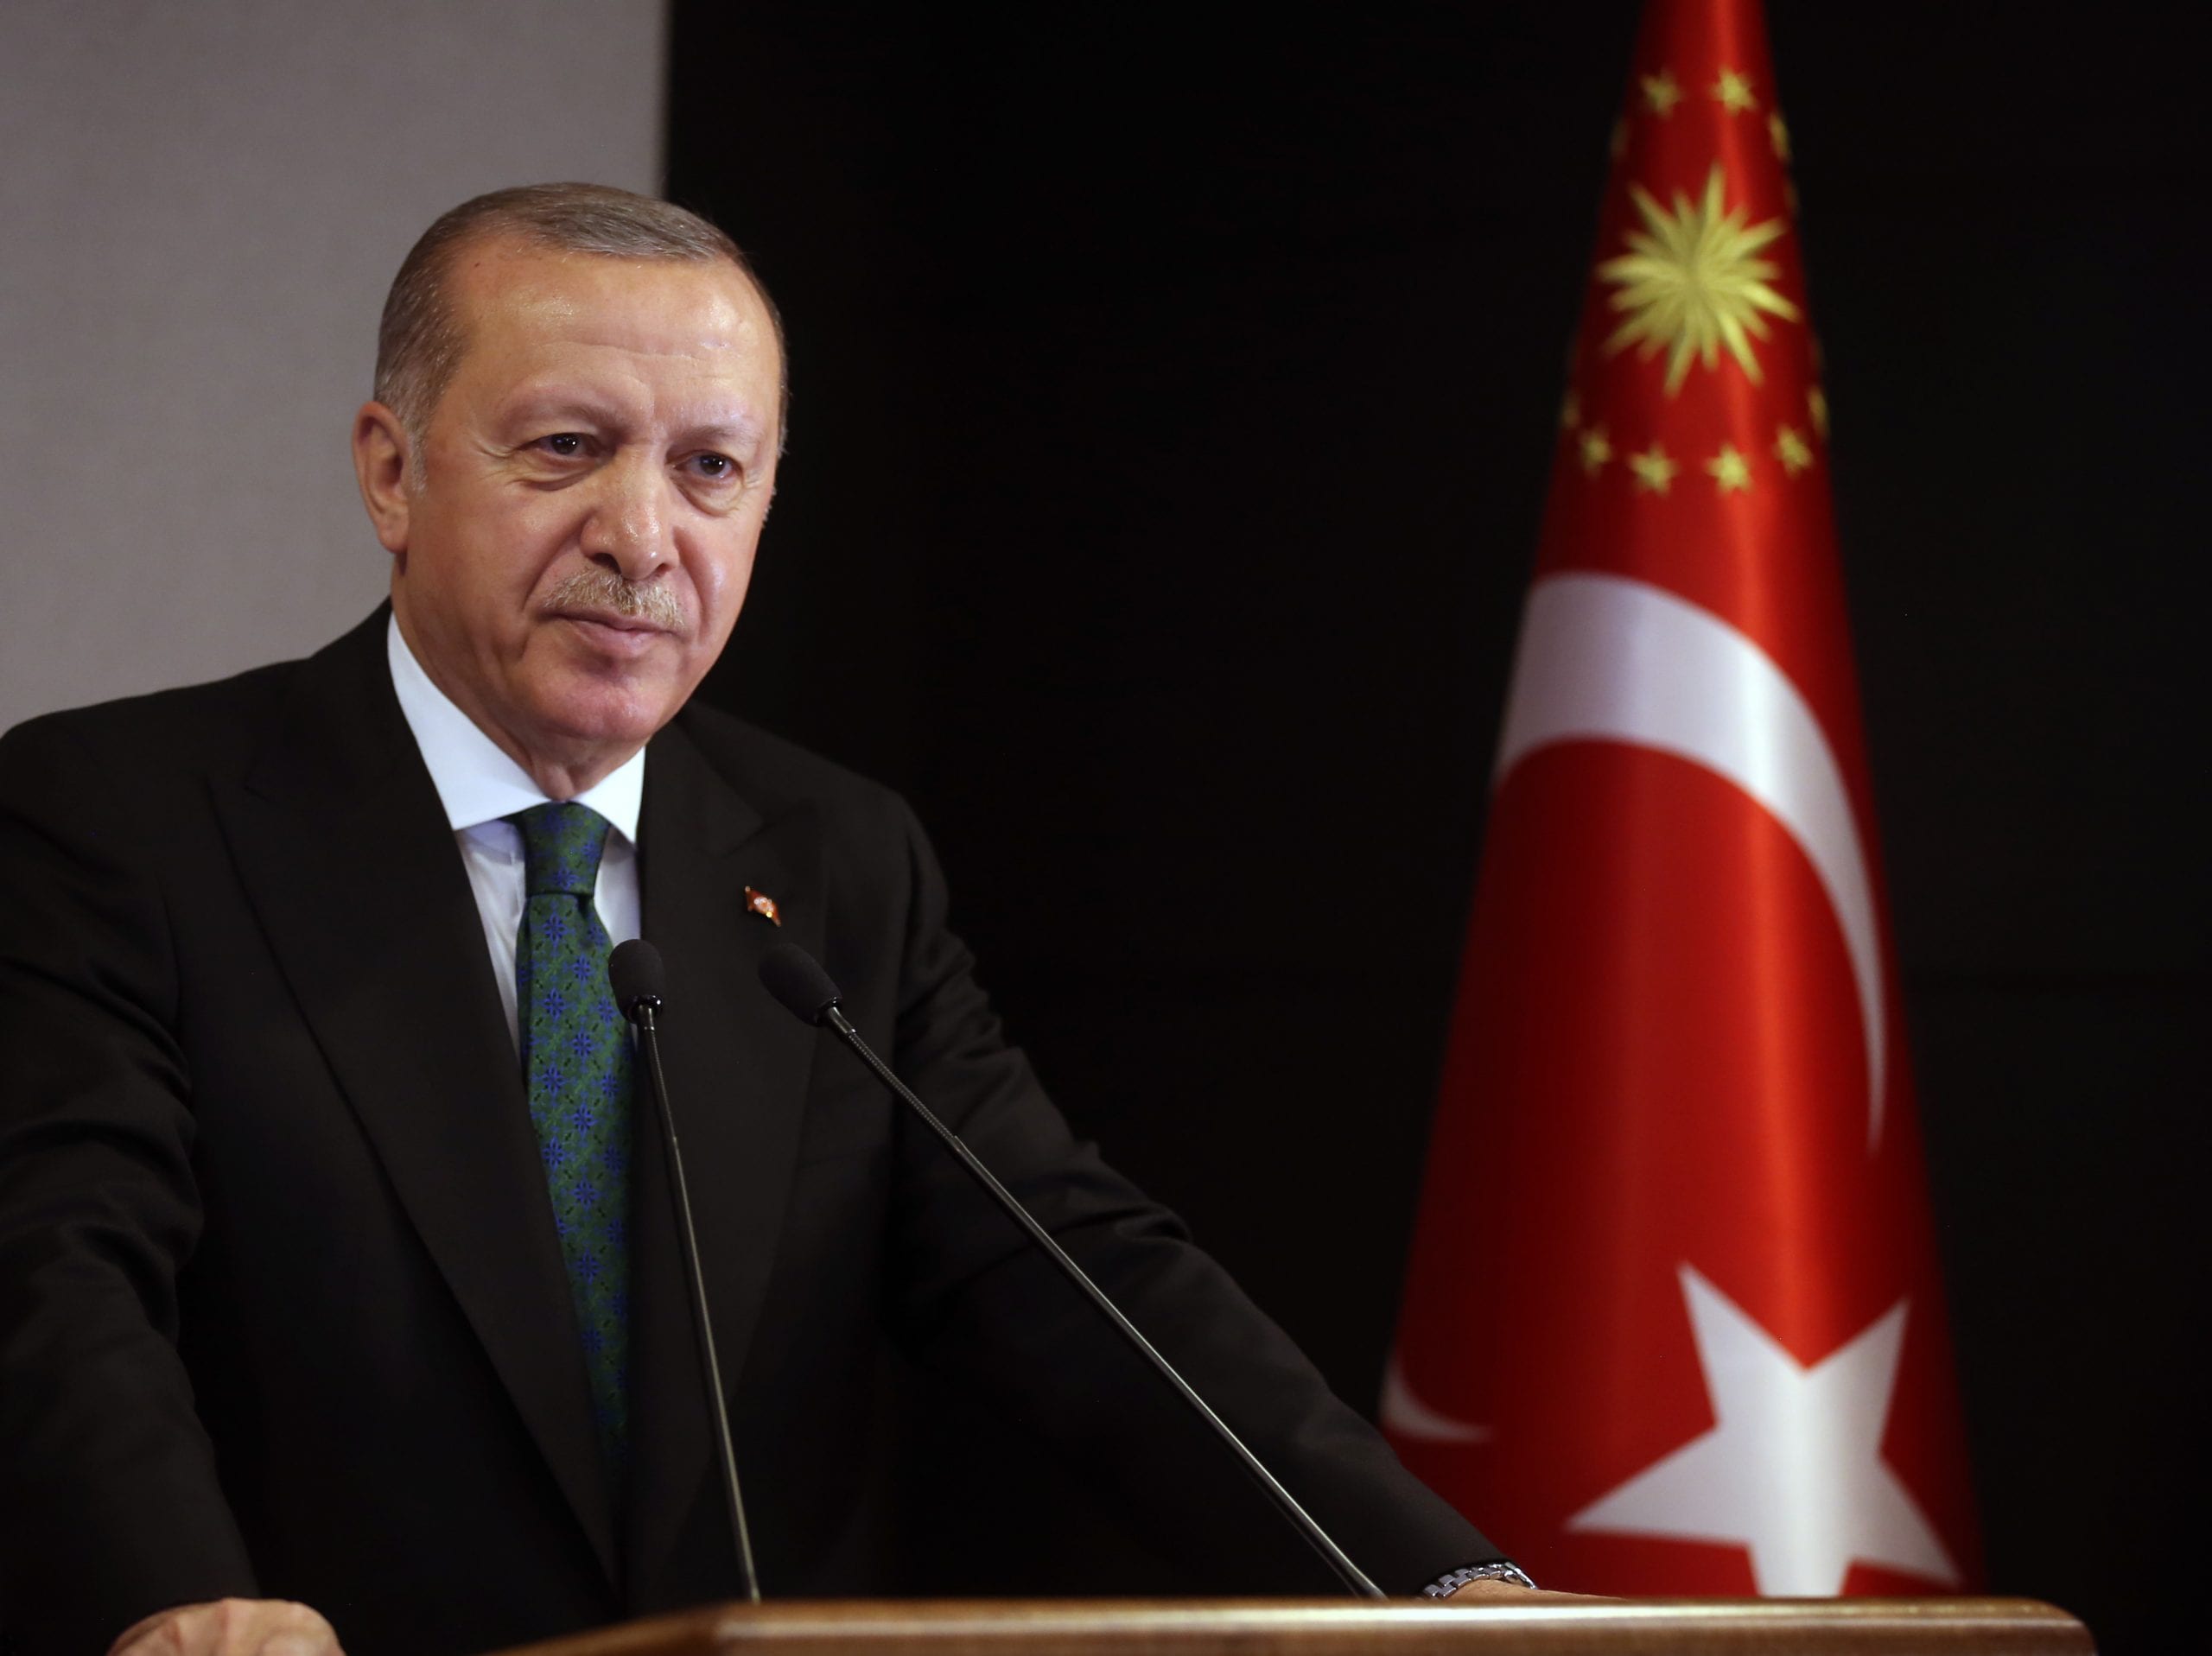 Turkey started to emerge from COVID-19 crisis, Erdoğan says